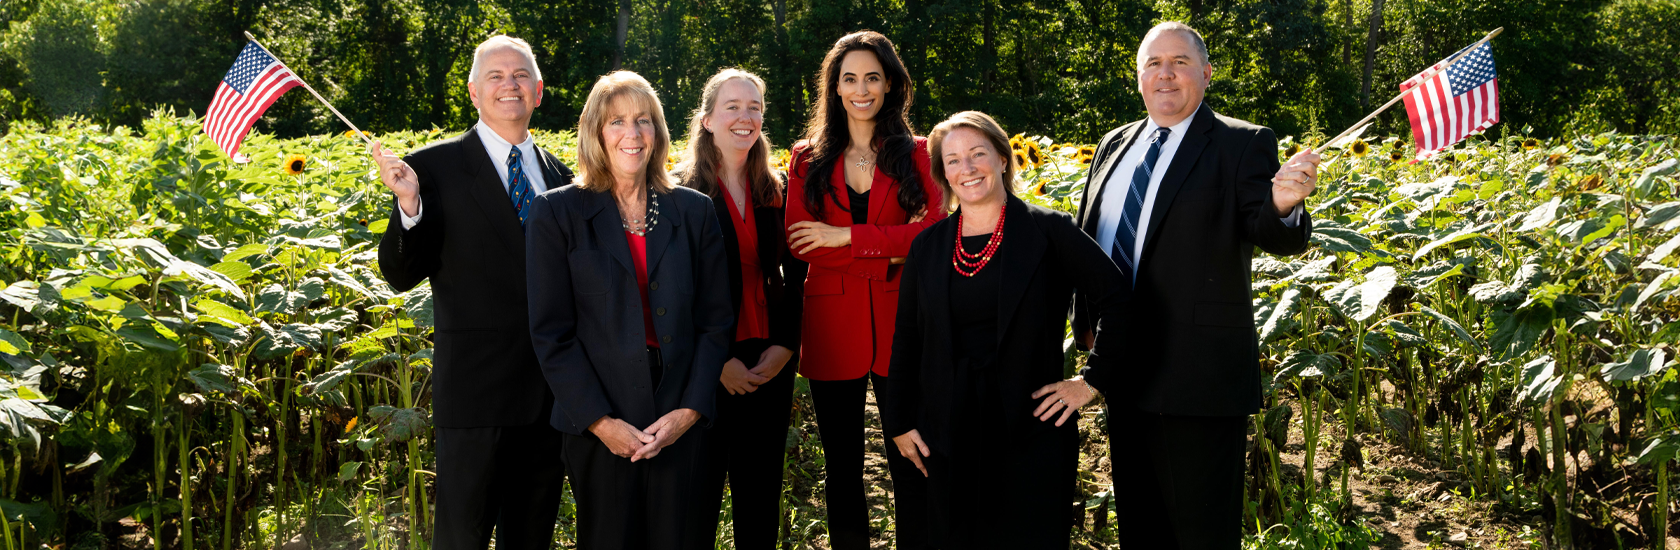 Team image of Empower House Financial Group